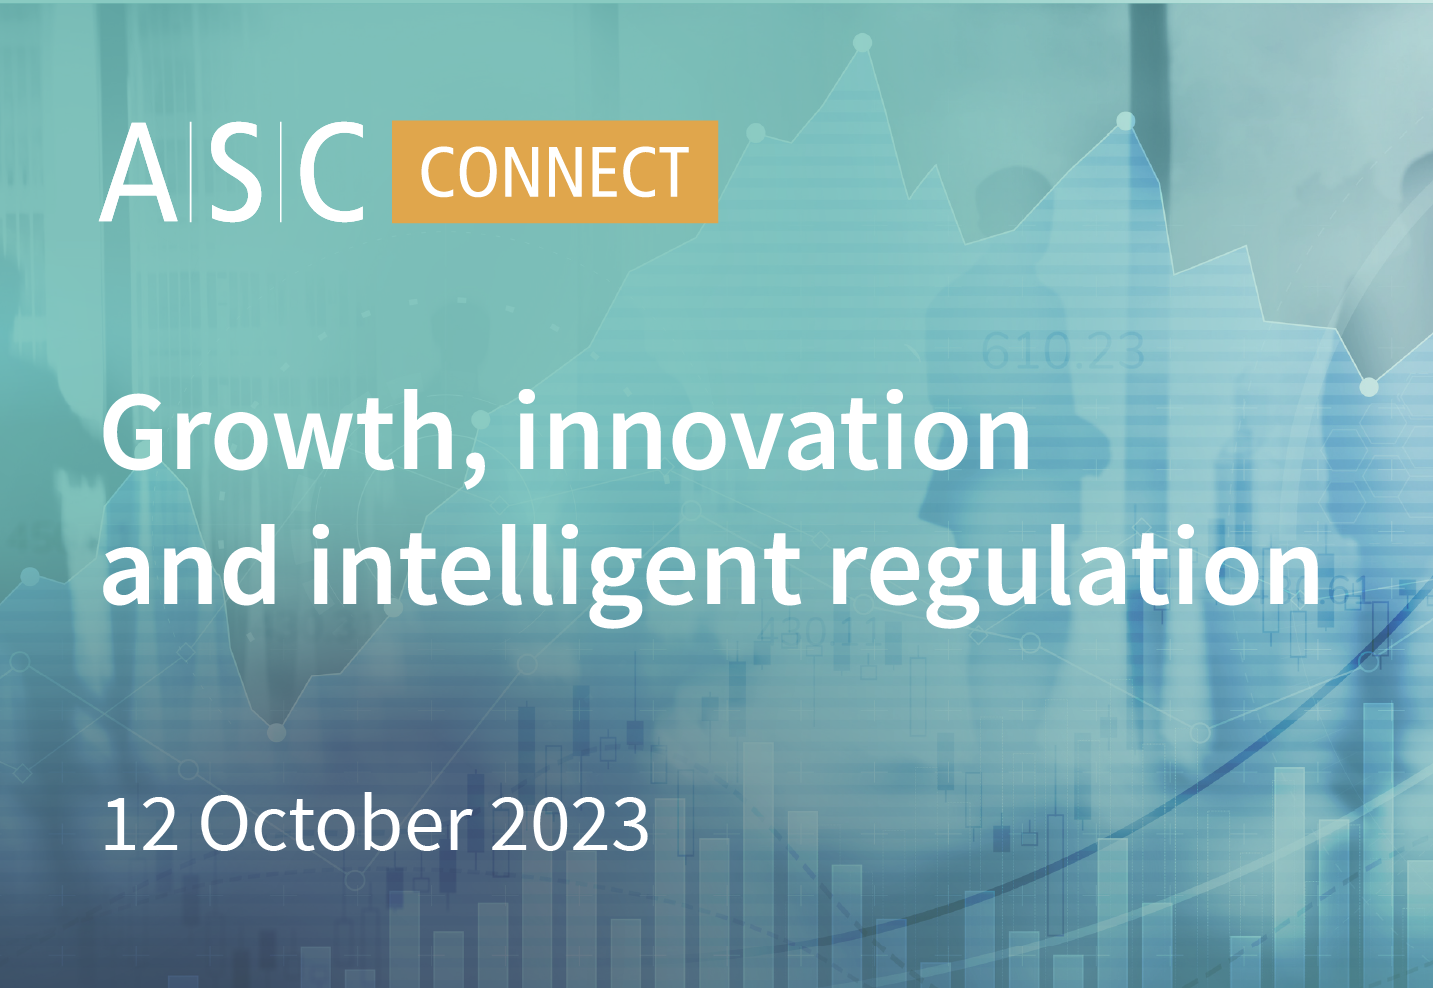 ASC Connect Growth, innovation and intelligent regulation